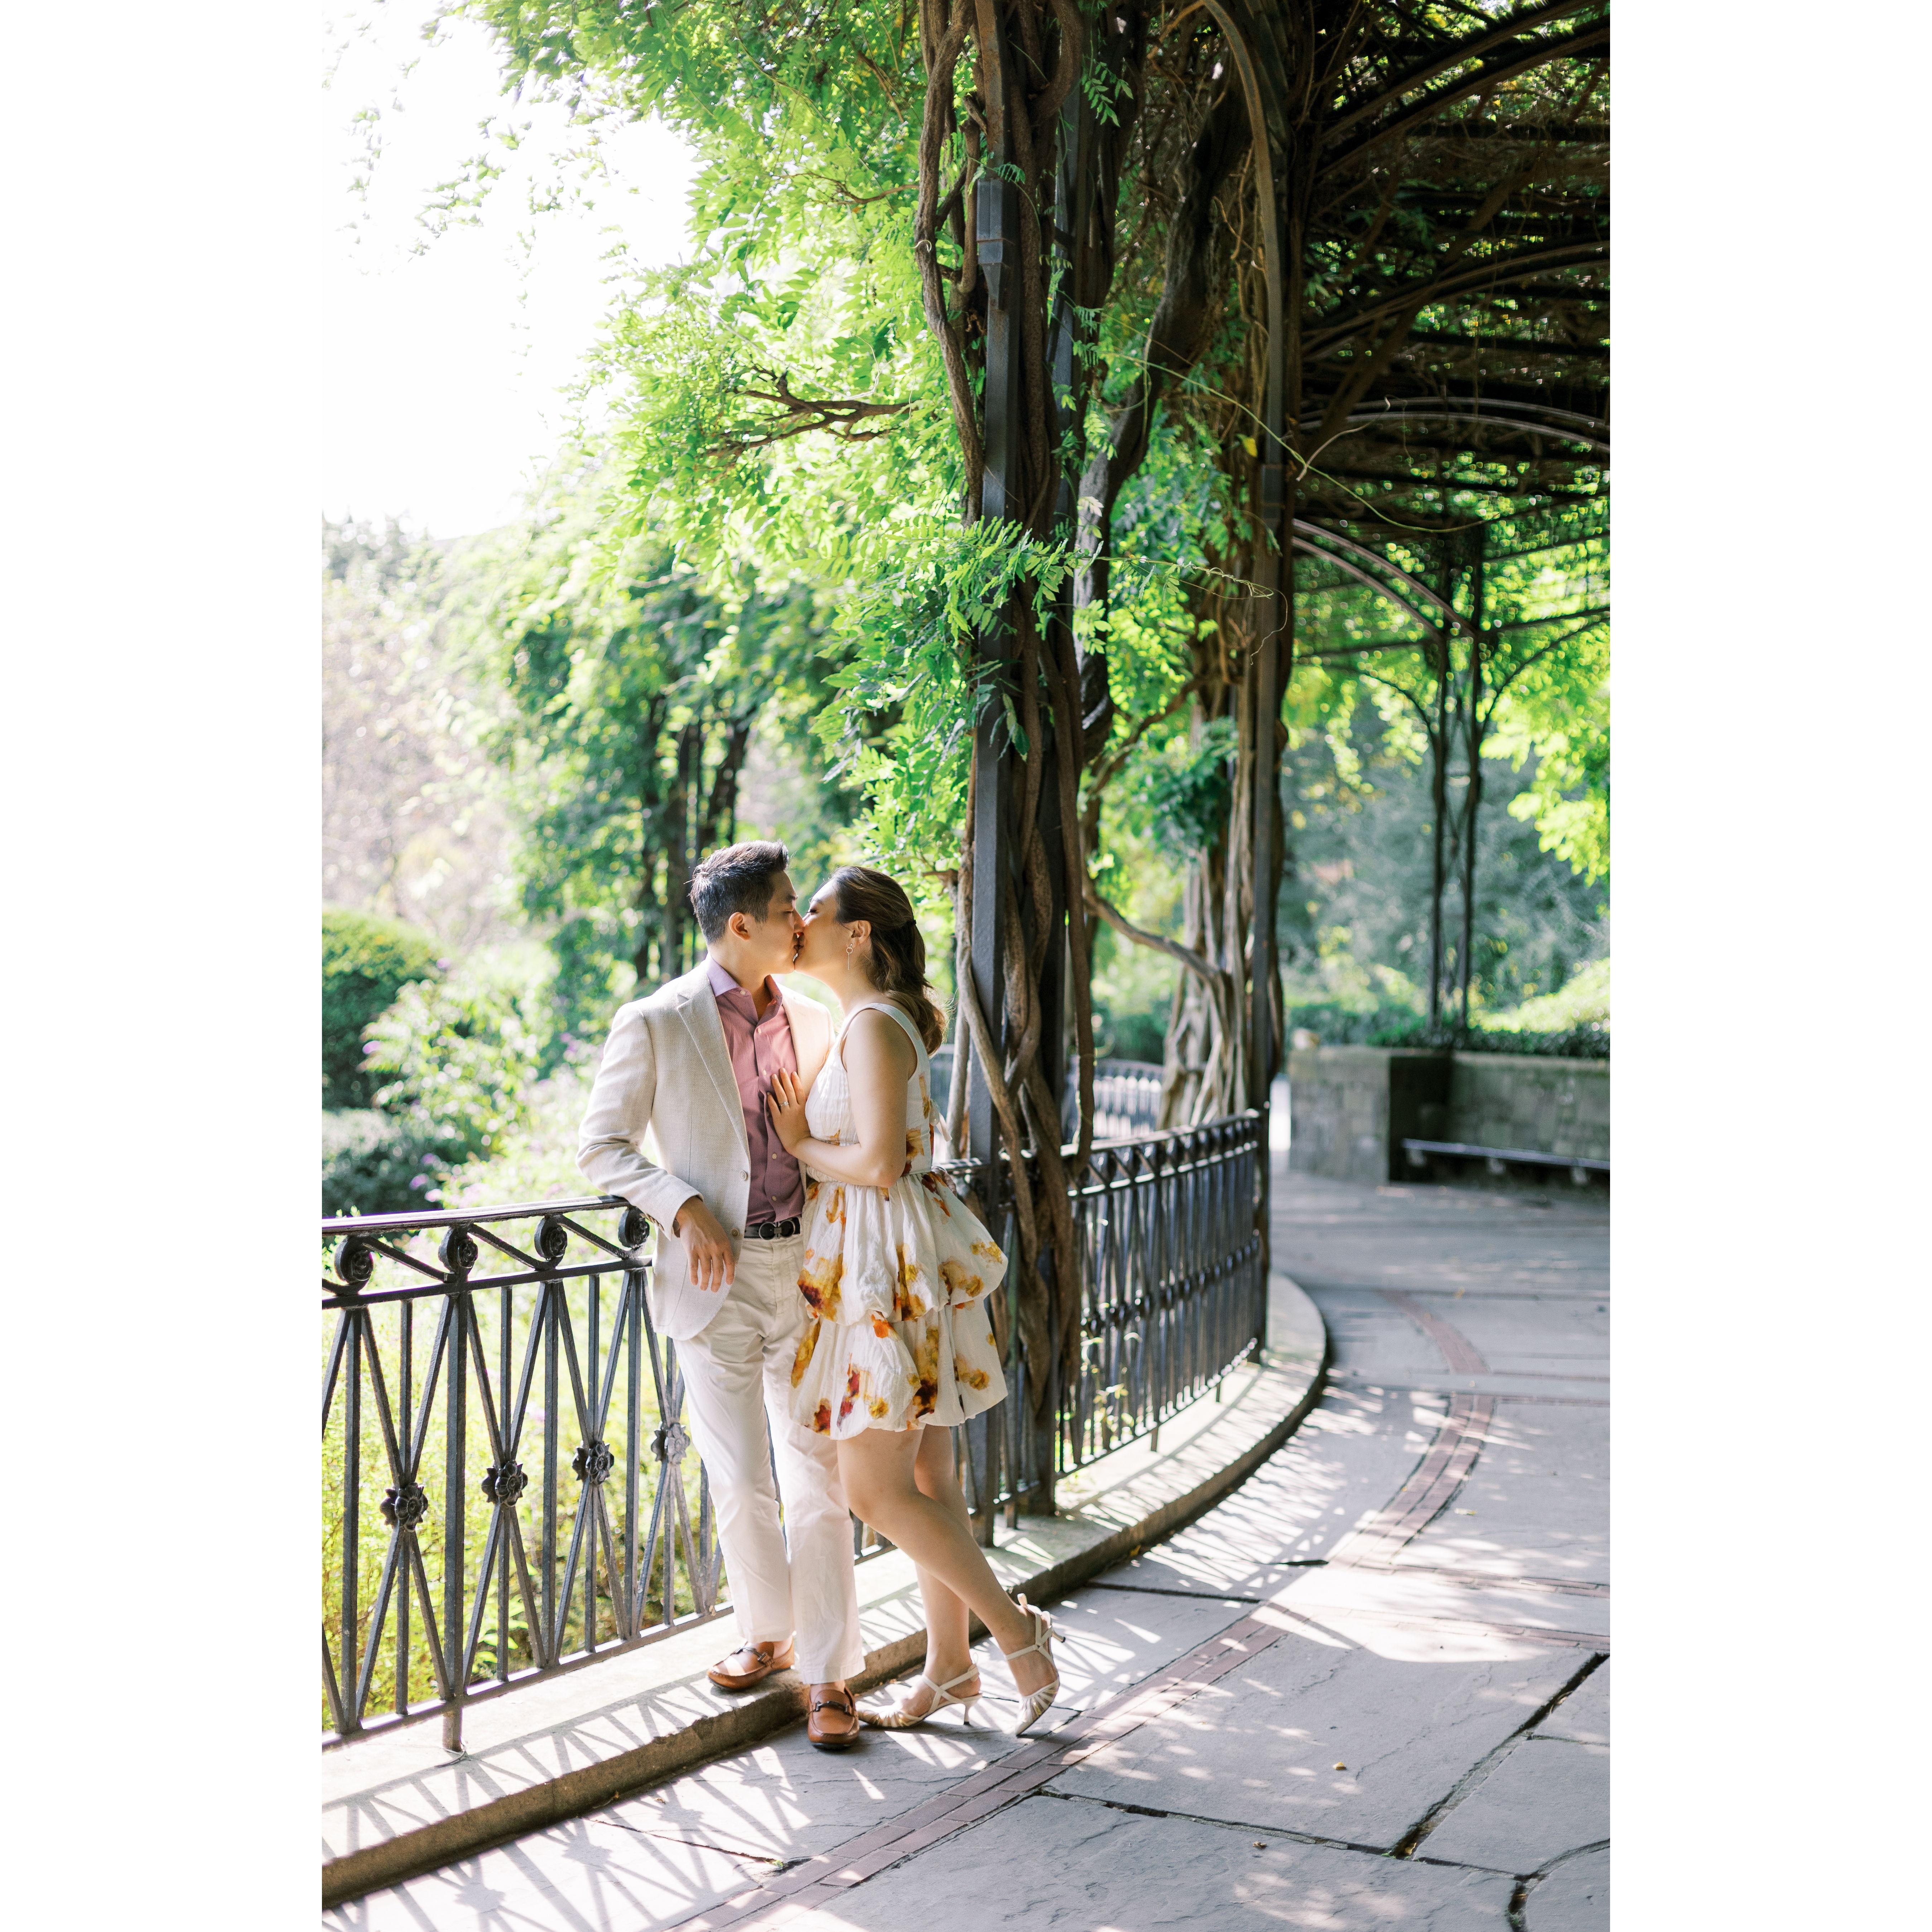 Sep 2022: Returning to the Conservatory Garden for our engagement shoot after 3 years in NYC